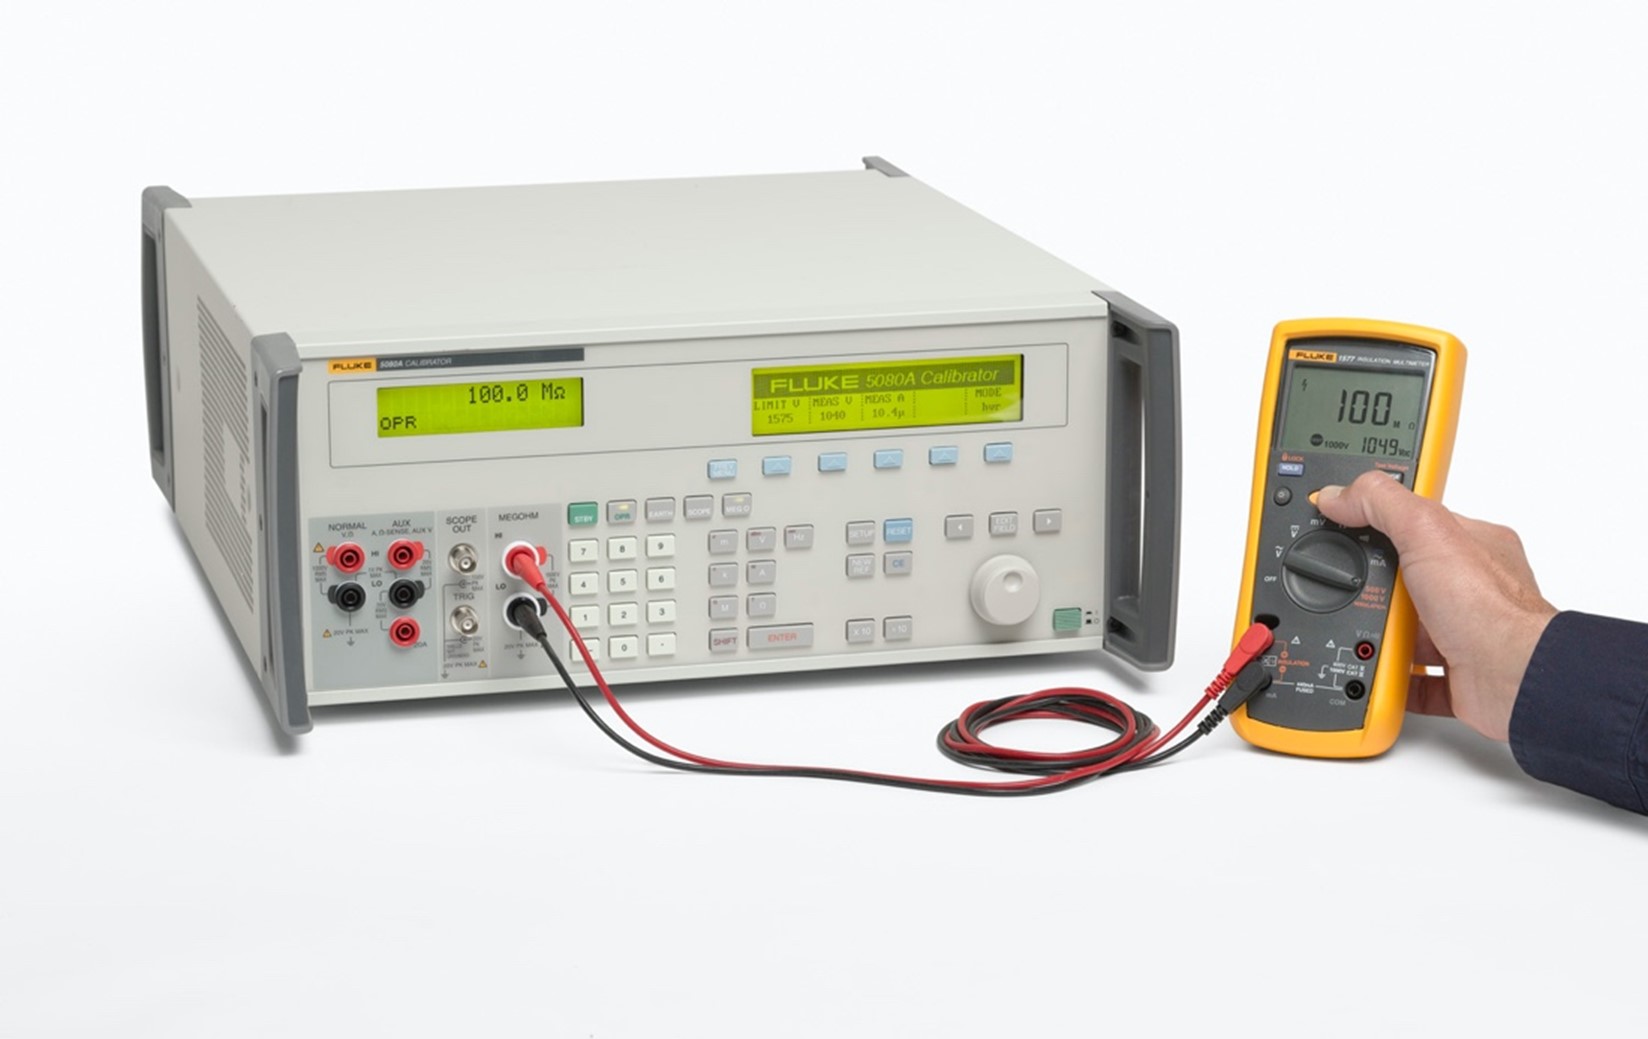 Fluke Calibration 5080A Multi-Product Calibrator is Being Used to Calibrate a Fluke 113 Digital Multimeter